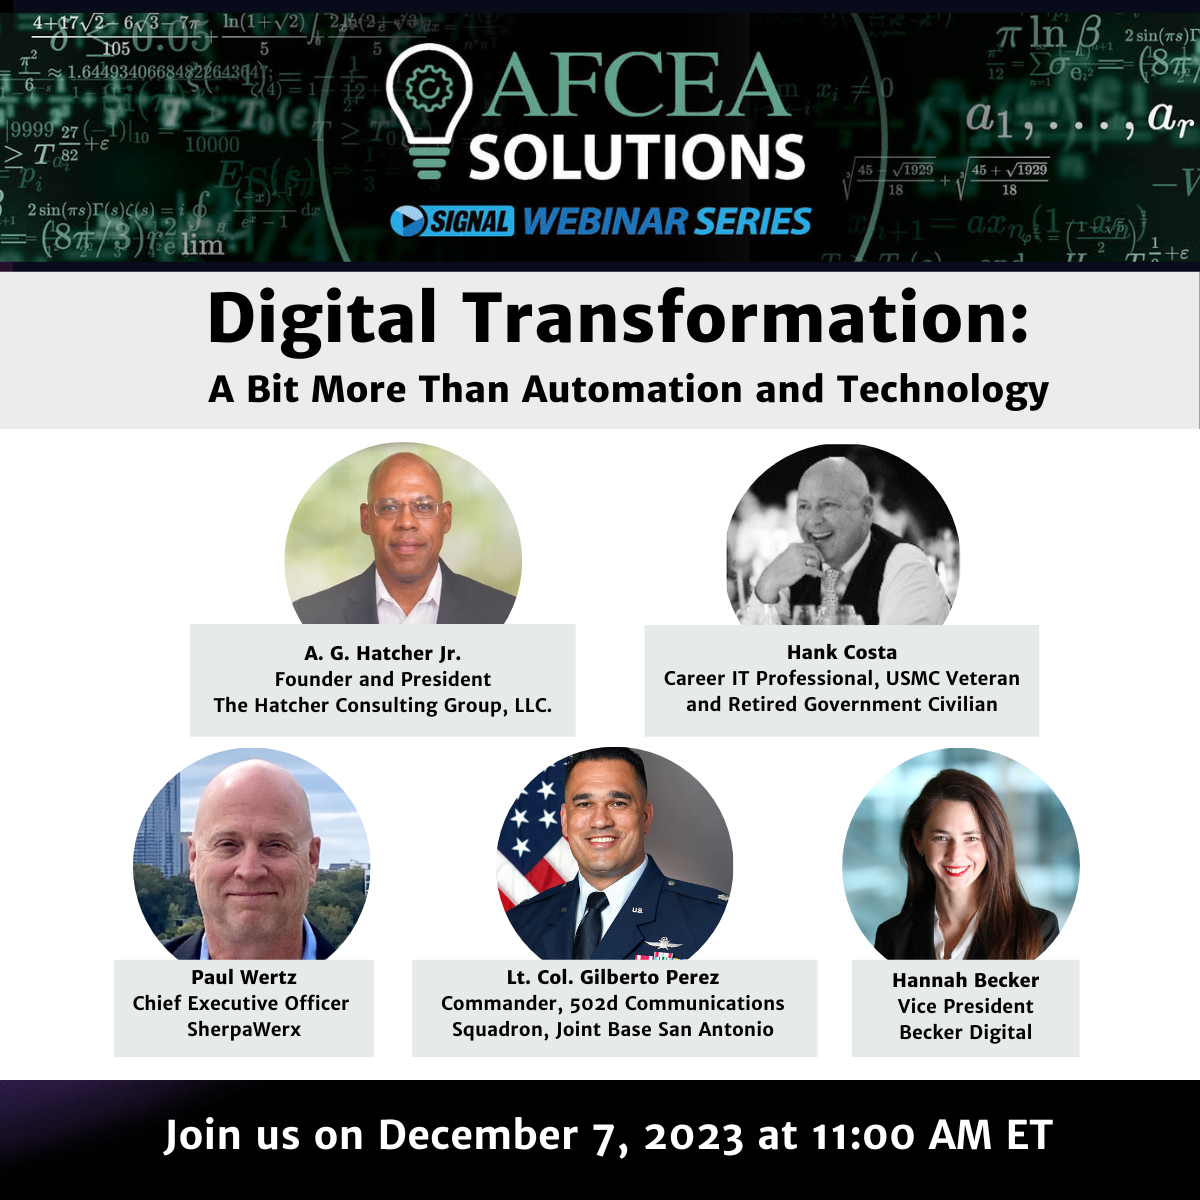 “Digital Transformation: A Bit More Than Automation and Technology” Webinar